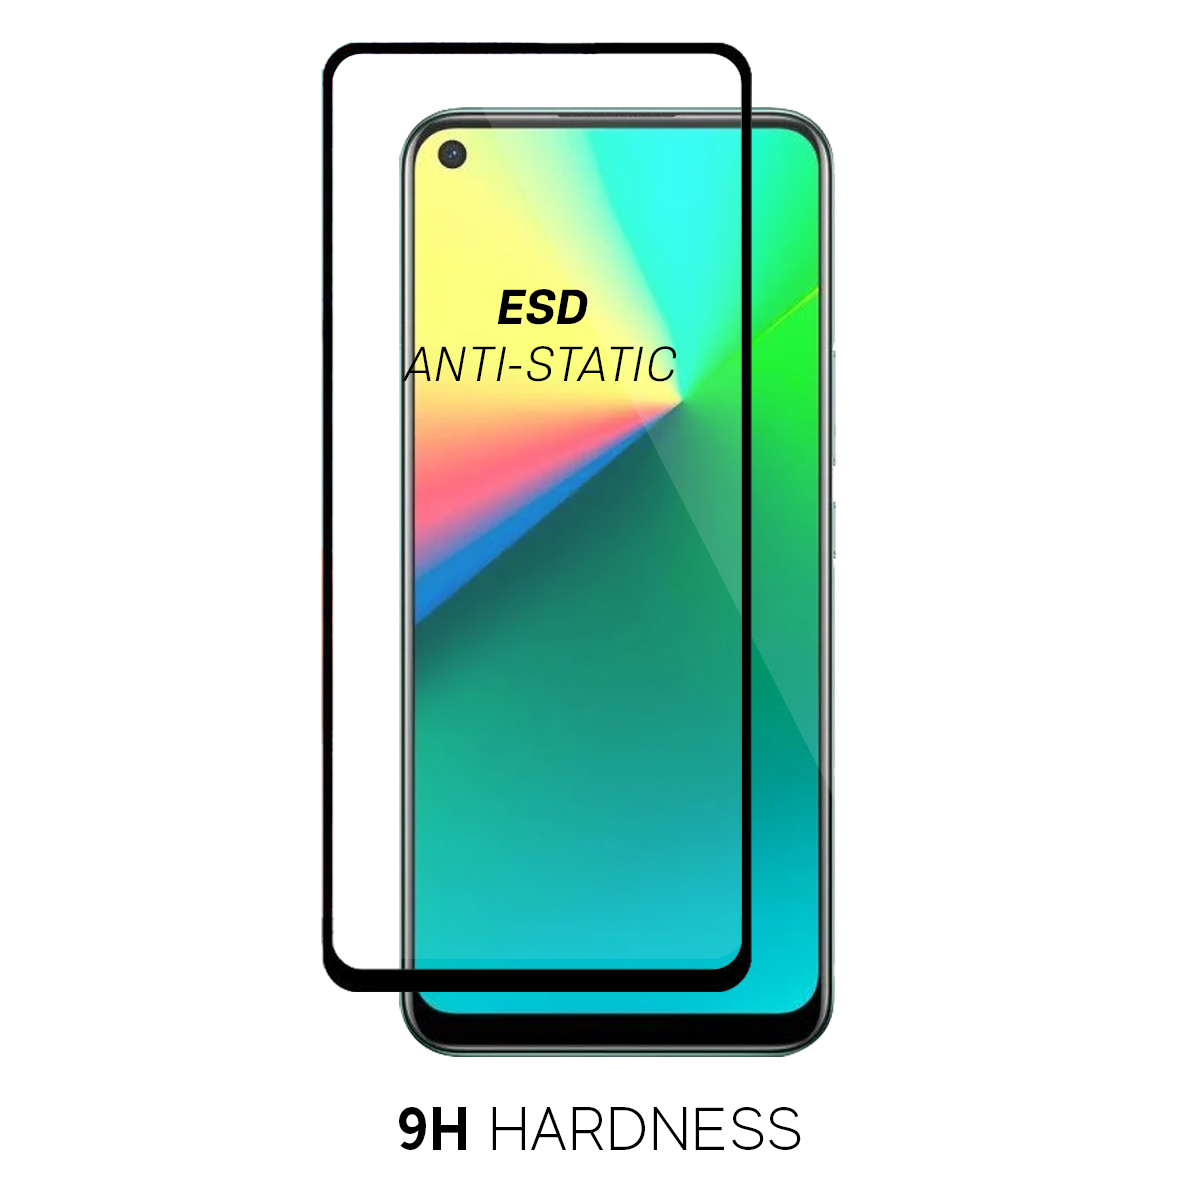 Beyox ESD Anti Static 5D Glass for Oppo A73